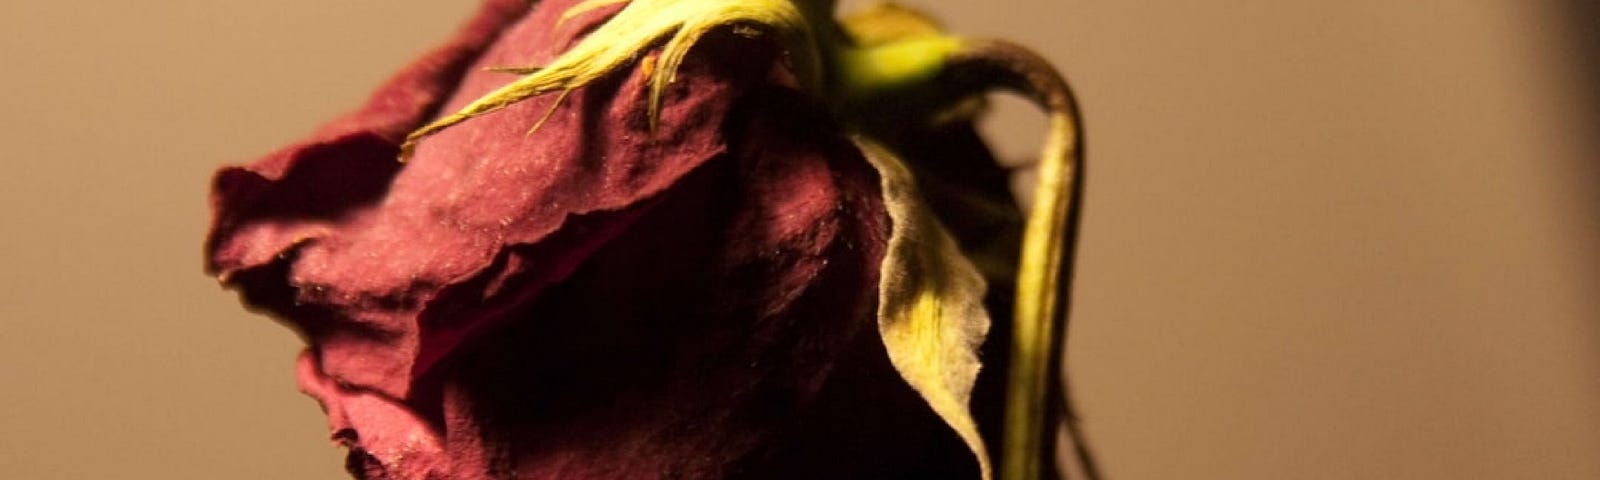 Dried, drooped red rose in dramatic lighting